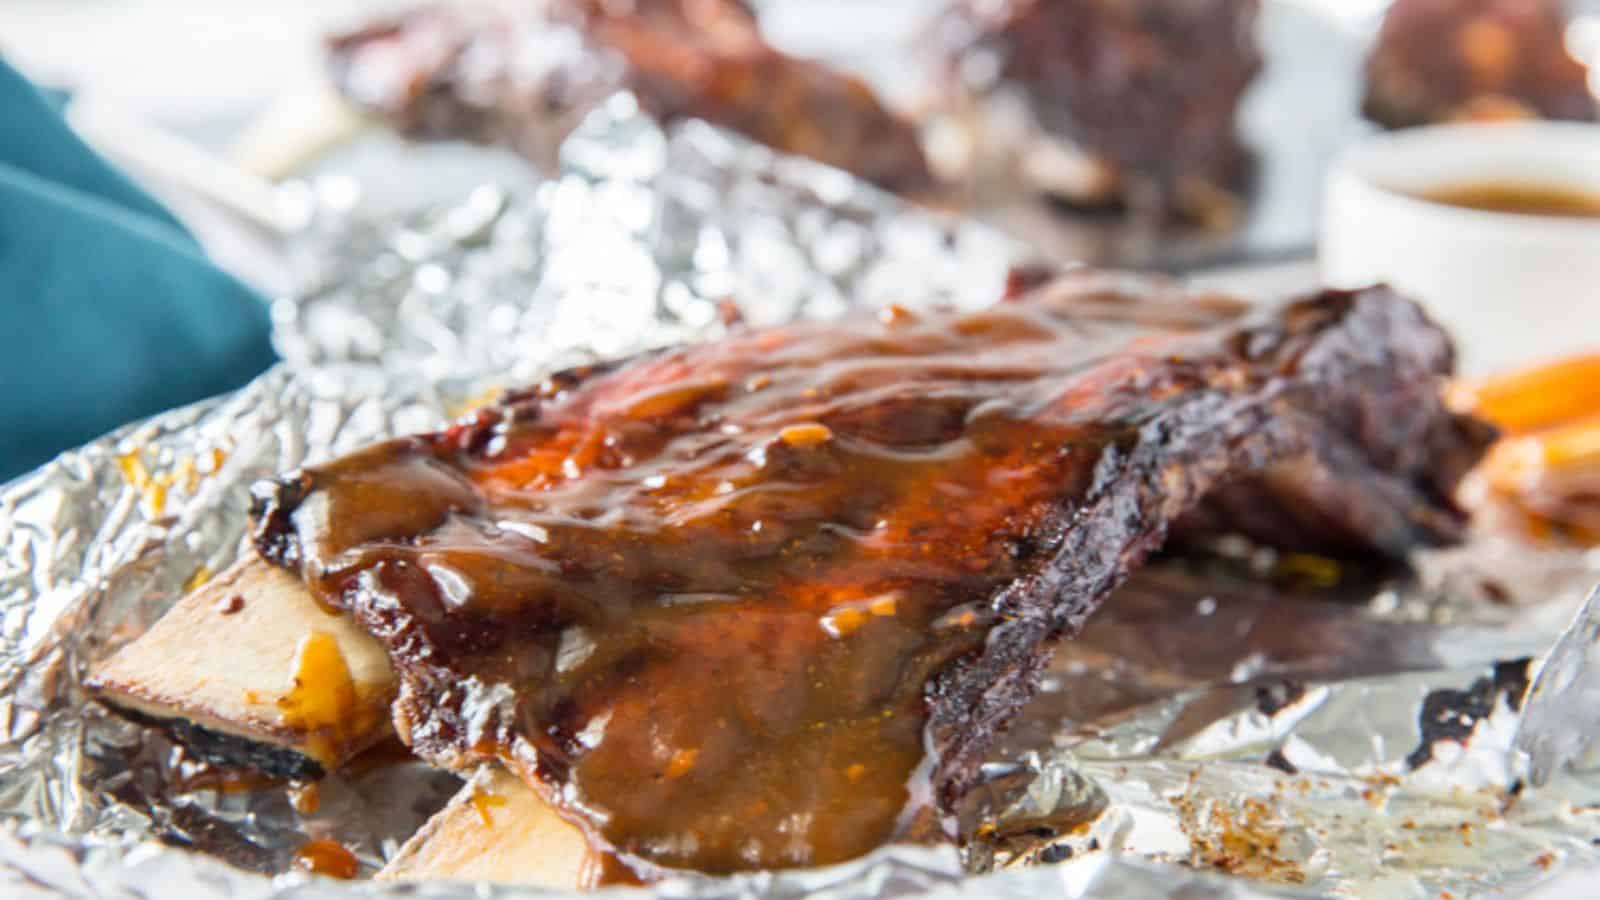 Instant Pot Ribs- Fall Off the Bones Beef Ribs Low Carb, Gluten-Free on foil with a basting brush and bbq sauce.